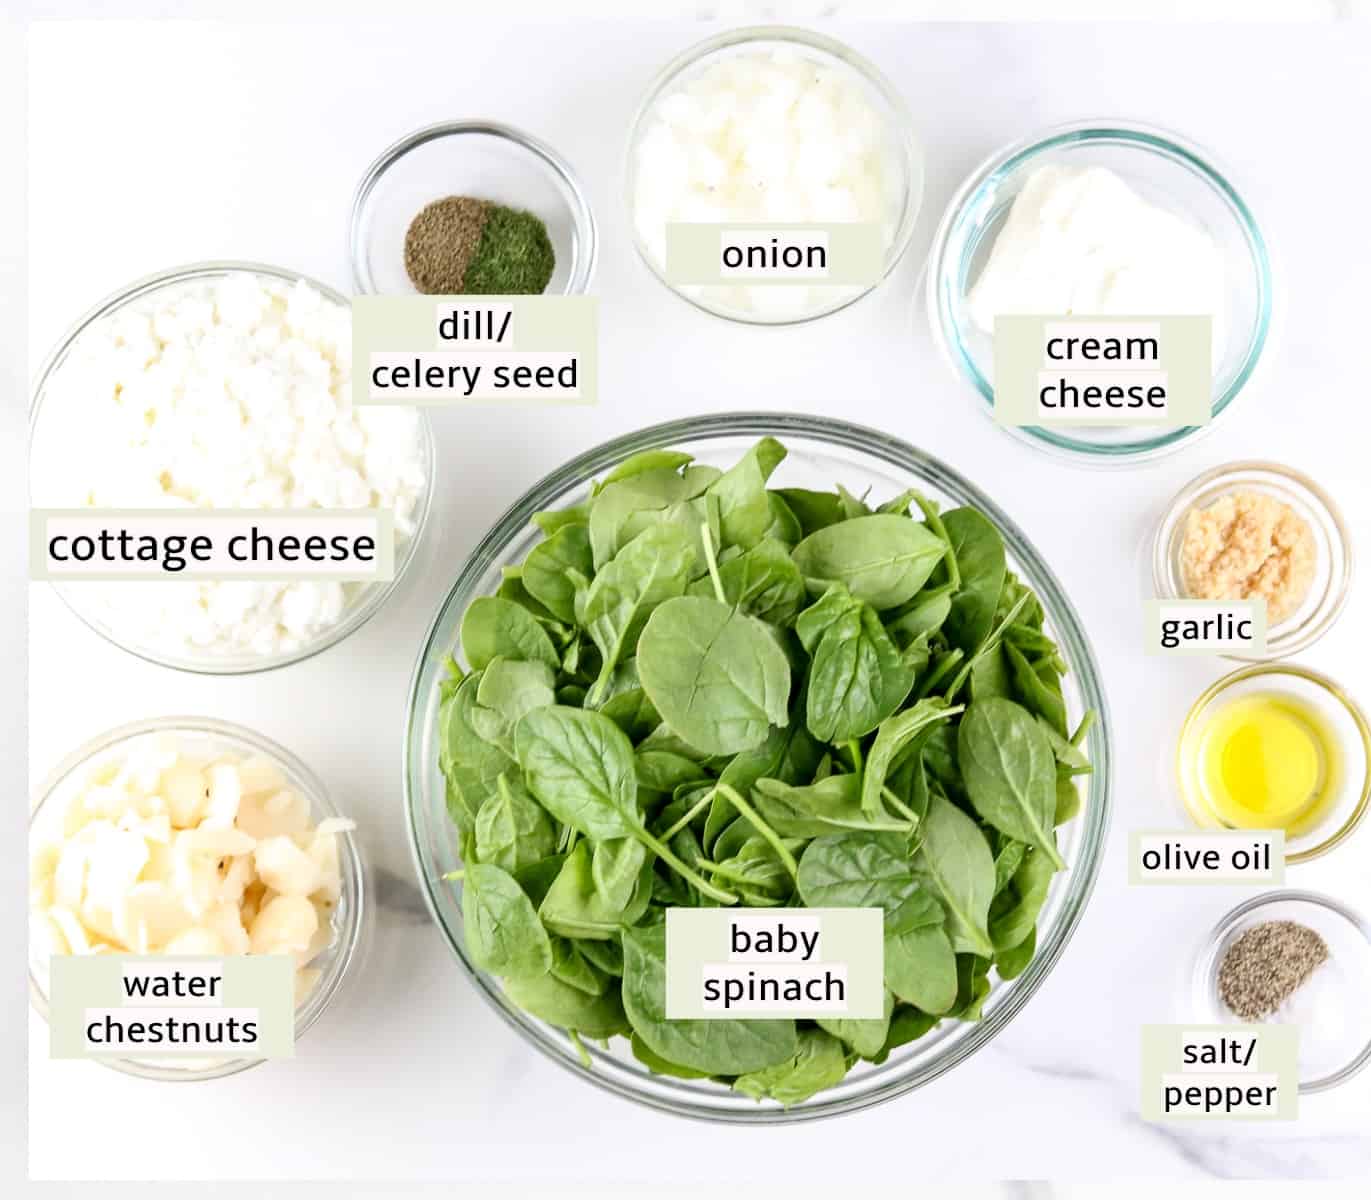 Recipe ingredient image for spinach dip.